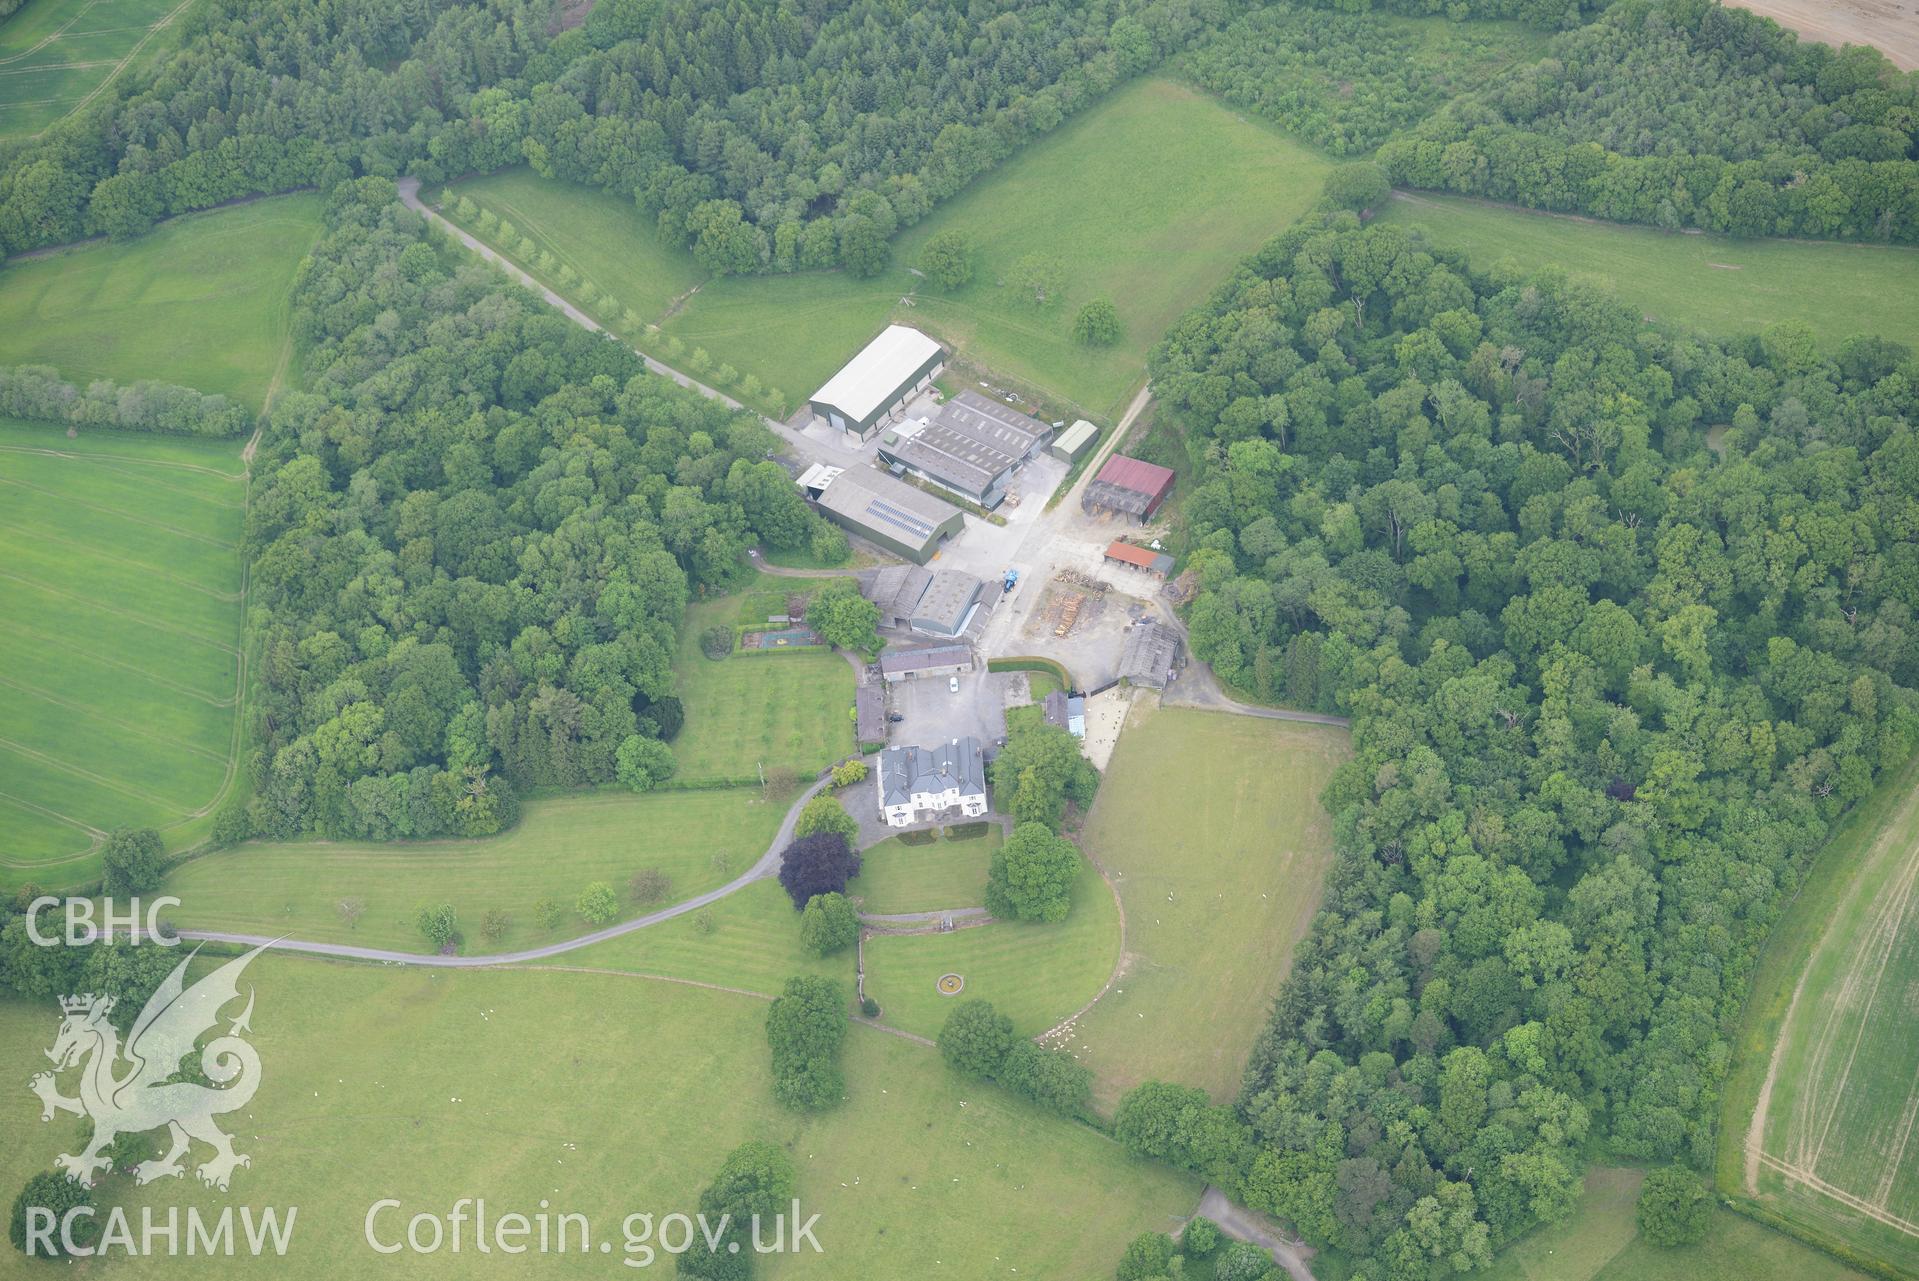 Hafod-Neddyn house and garden near Llandeilo. Oblique aerial photograph taken during the Royal Commission's programme of archaeological aerial reconnaissance by Toby Driver on 11th June 2015.